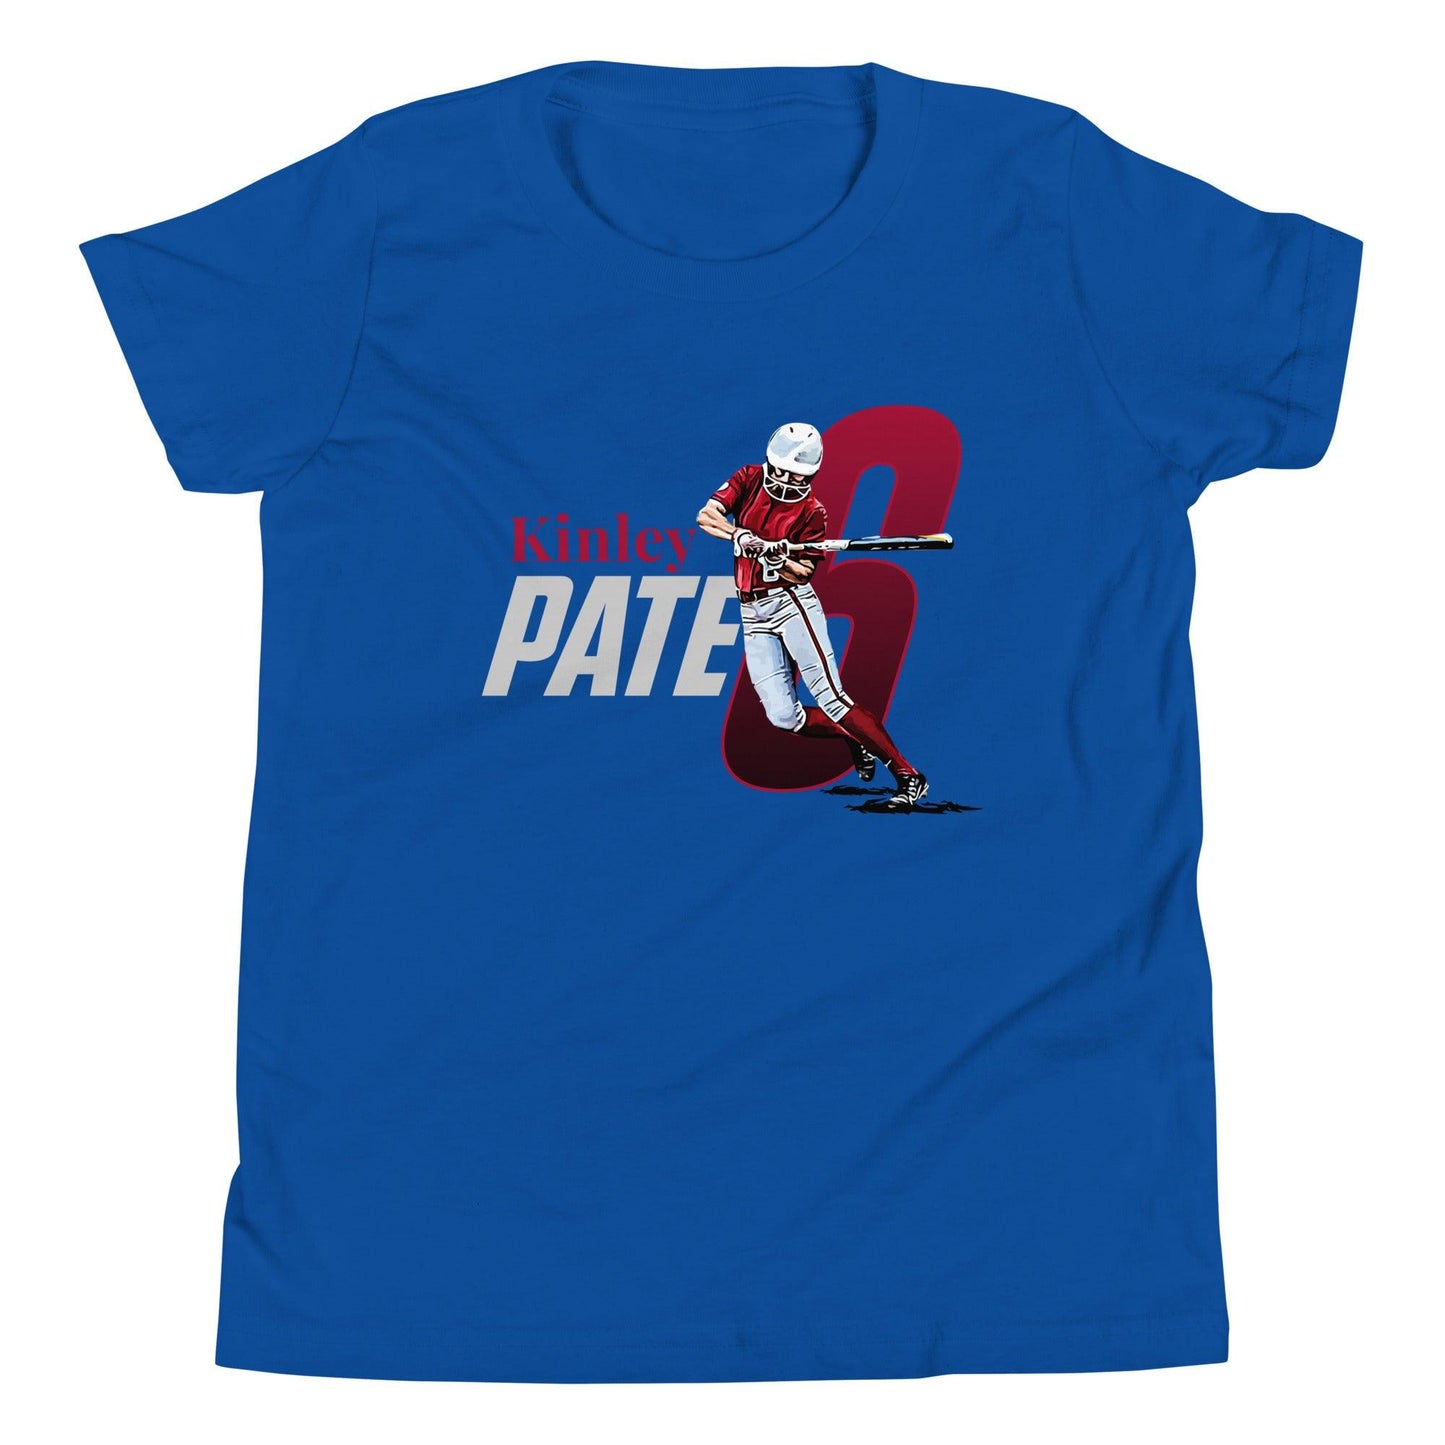 Kinley Pate "Gameday" Youth T-Shirt - Fan Arch